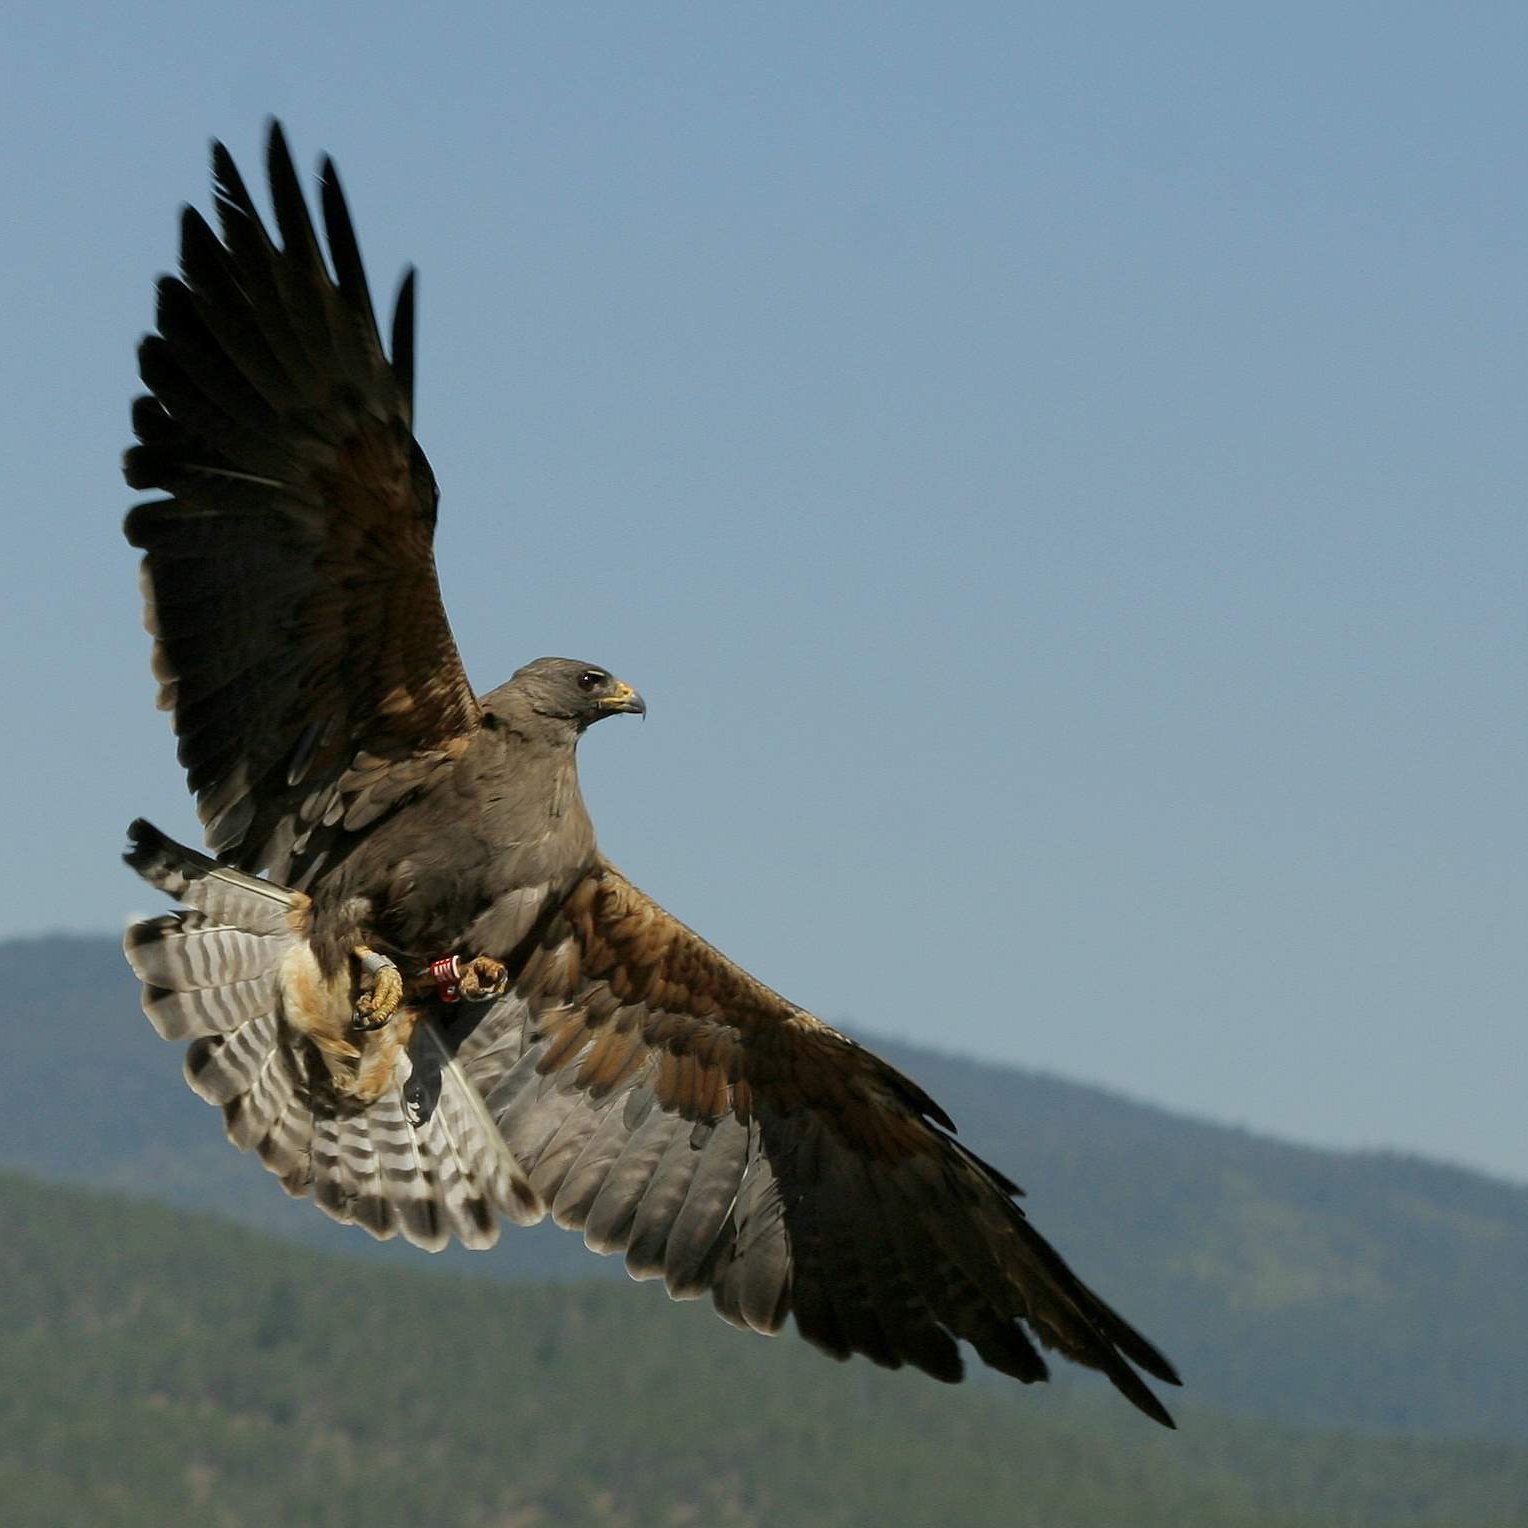 We have been studying raptors in northern California for 40 years.  In particular, our research has been trying to understand a population of Swainson's Hawks.